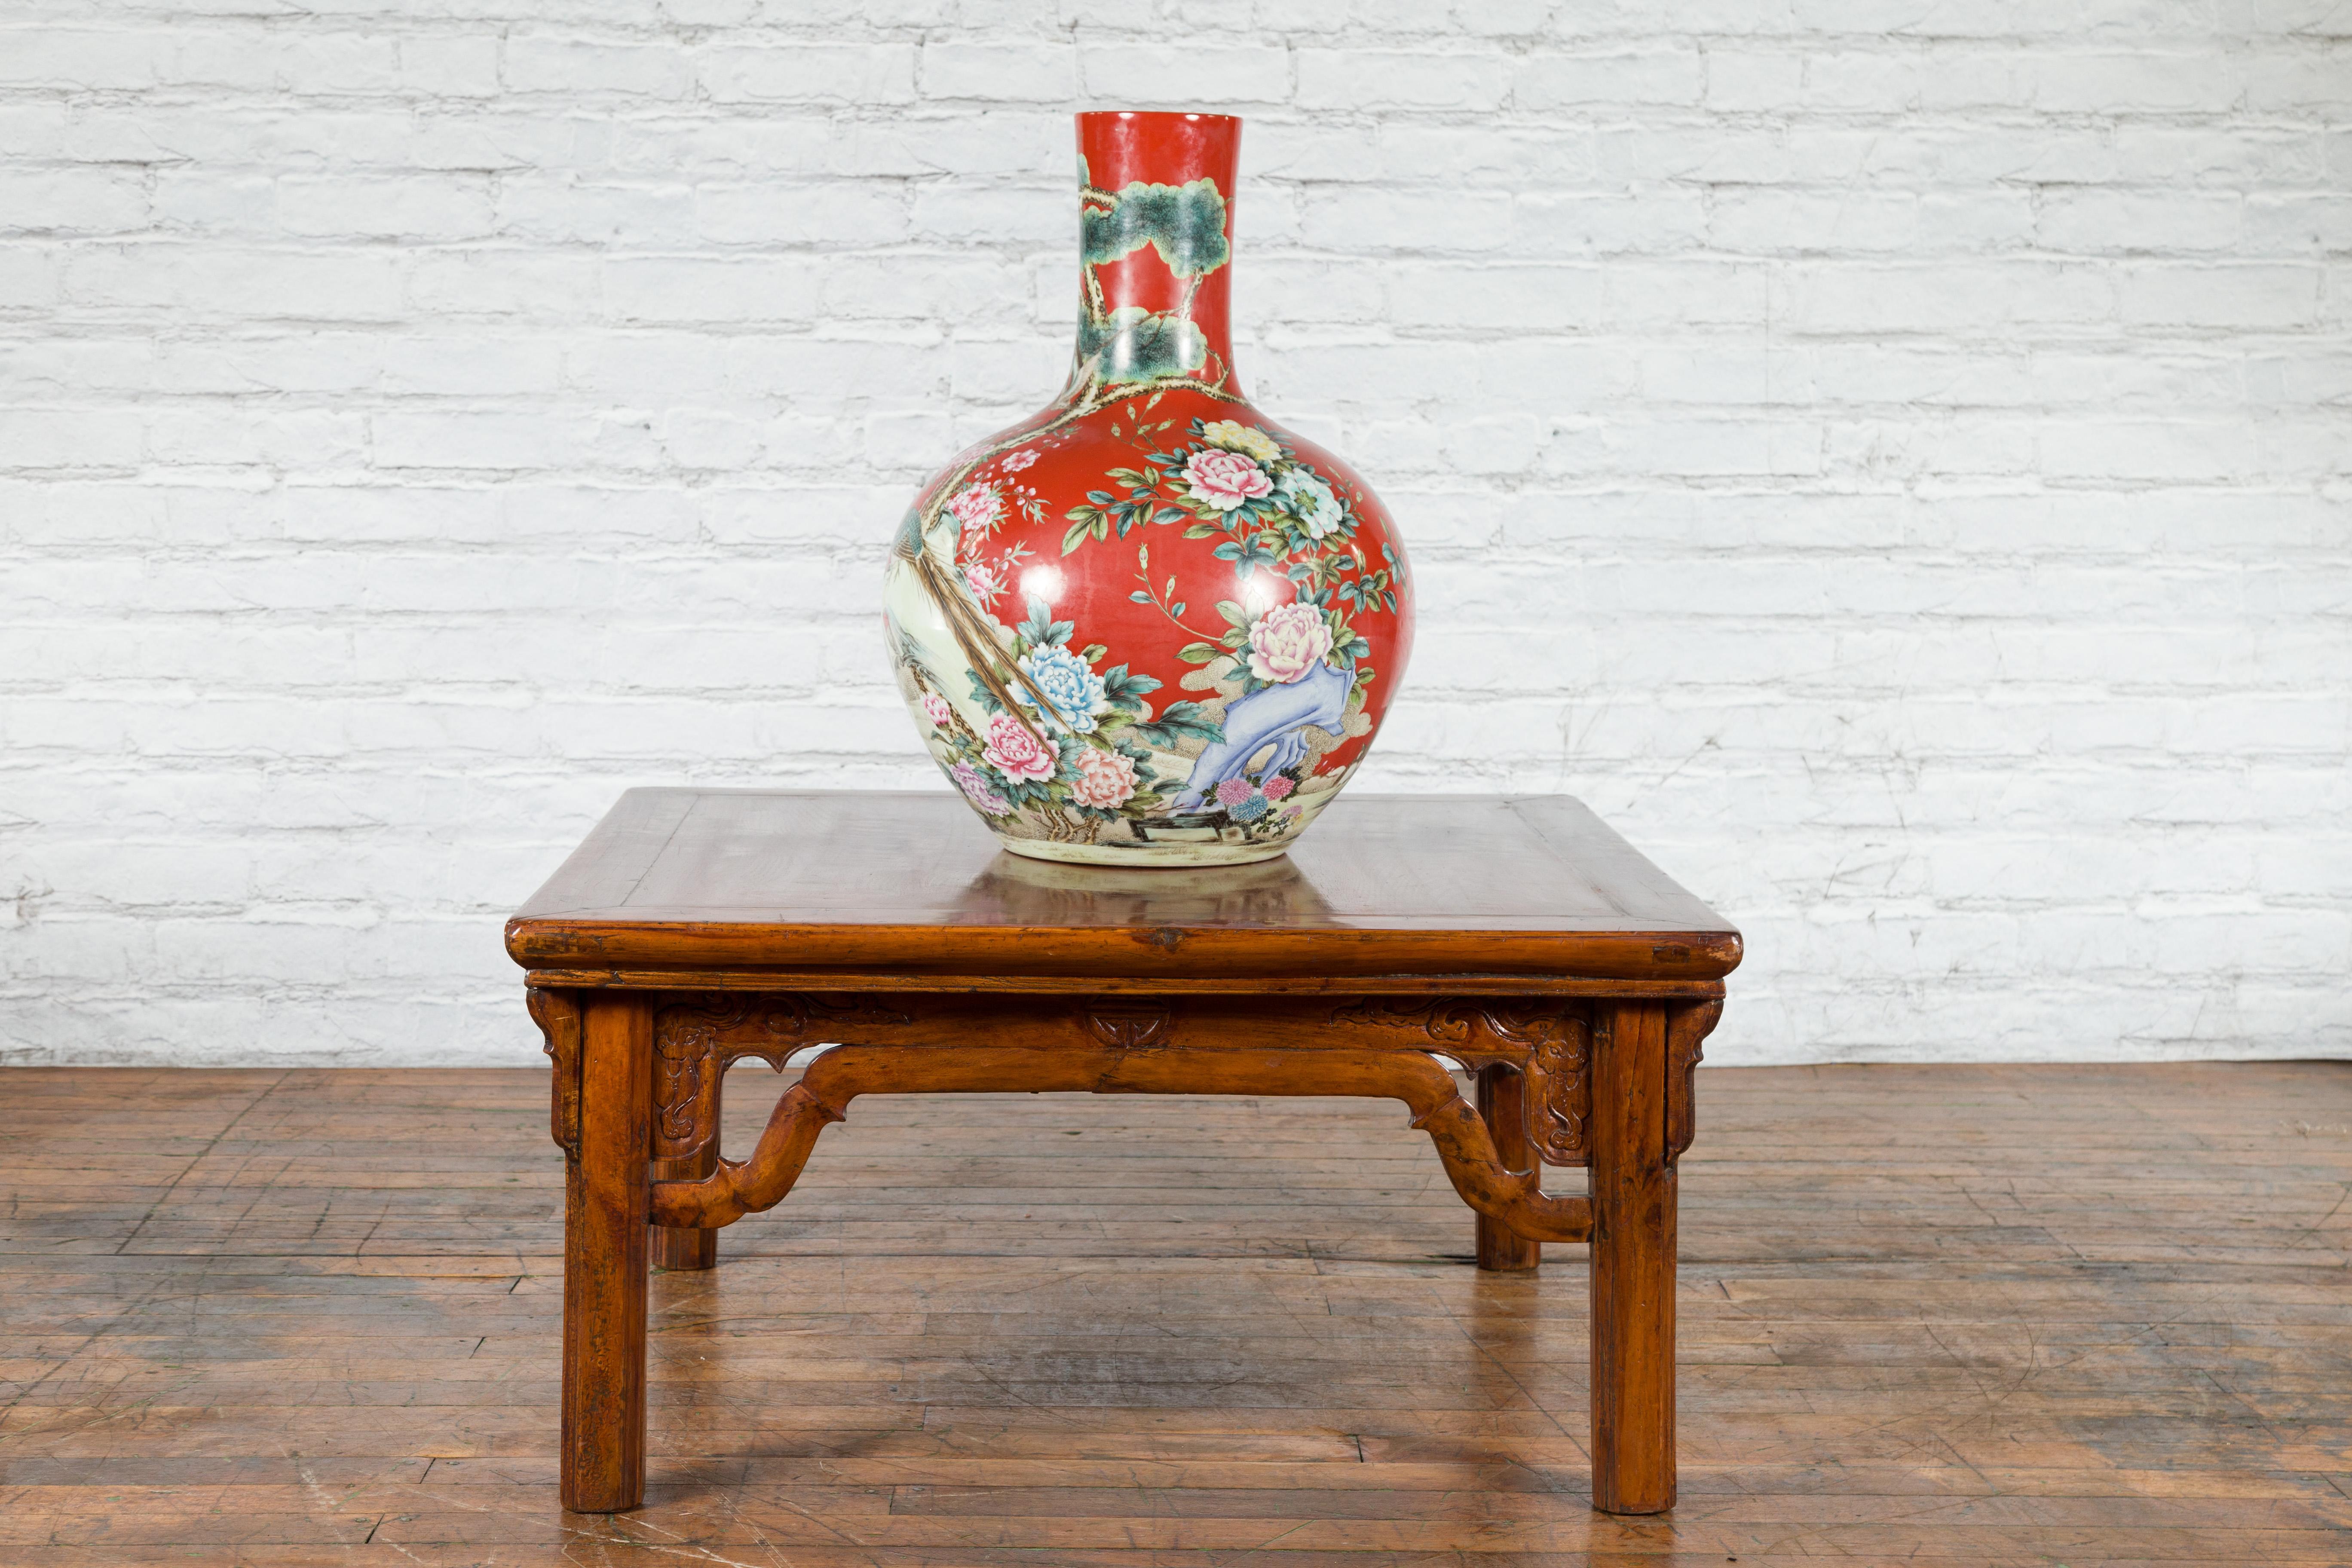 A Chinese Qing Dynasty period elm wood coffee table from the 19th century with dragon-carved apron, humpback stretchers and angled spandrels. Created in China during the Qing Dynasty period in the 19th century, this elm wood coffee table features a